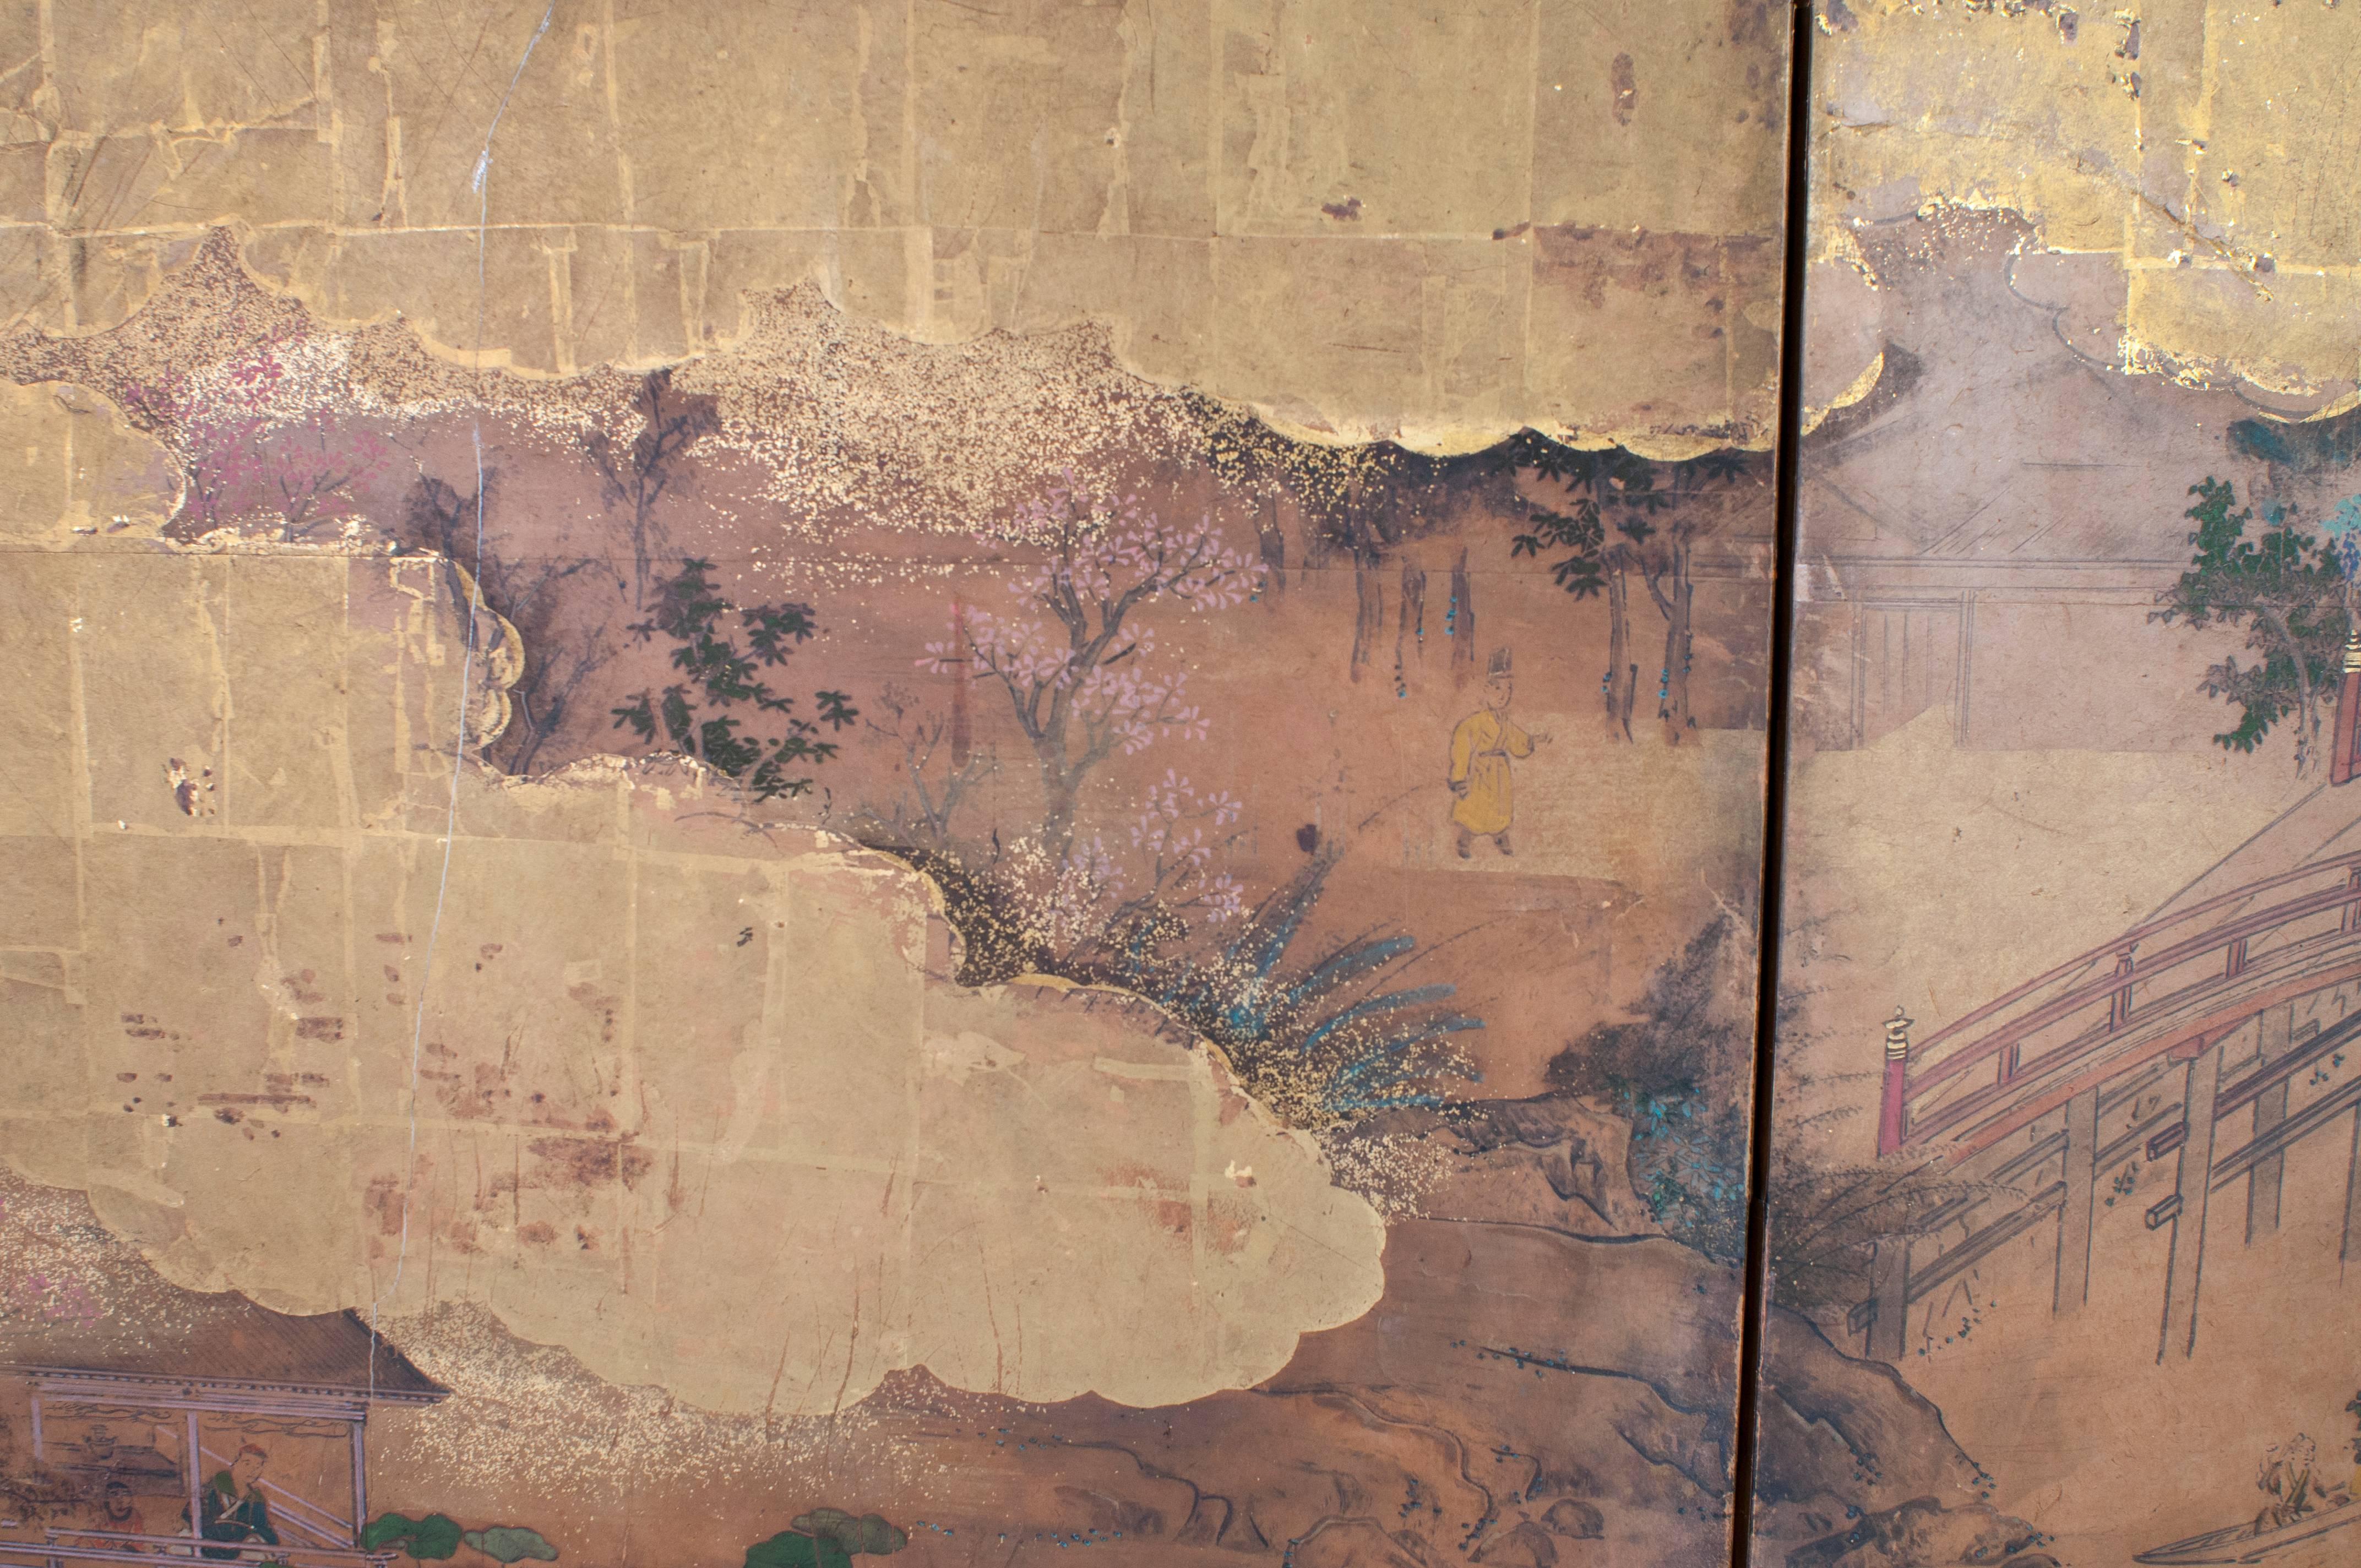 A Japanese screen with six panels.
From left to right width measurements:
A 25 1/2.
B 24 3/4.
C 24 5/8.
D 24 3/4.
E 24 3/4.
F 25 1/2.